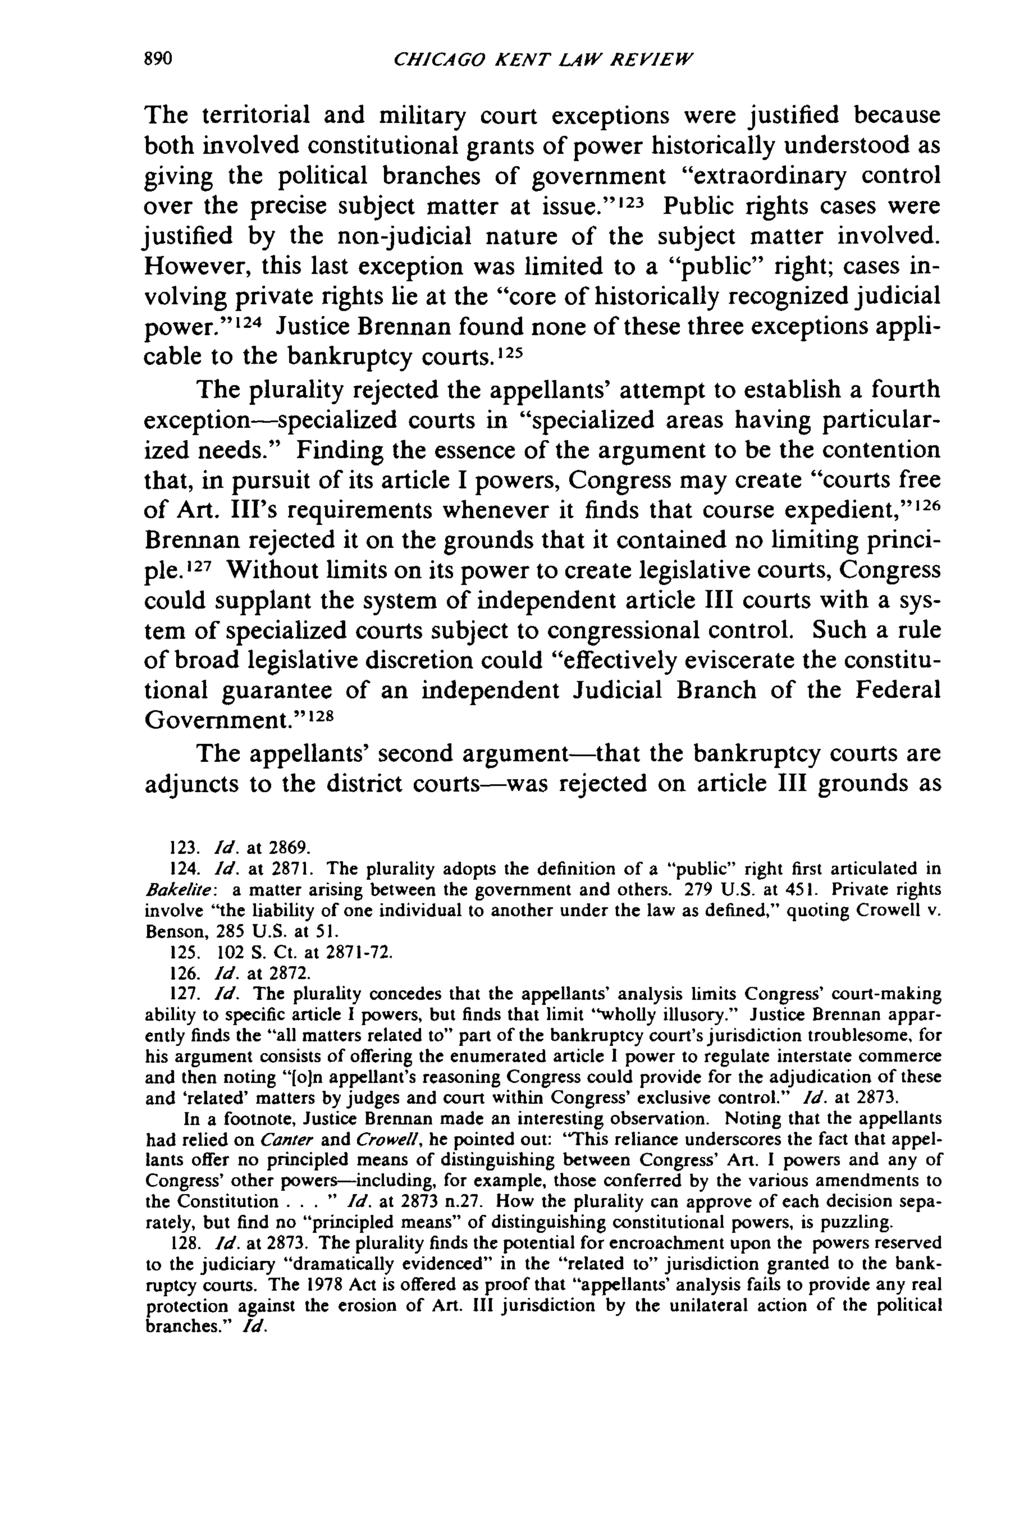 CHICAGO KENT LAW REVIEW The territorial and military court exceptions were justified because both involved constitutional grants of power historically understood as giving the political branches of